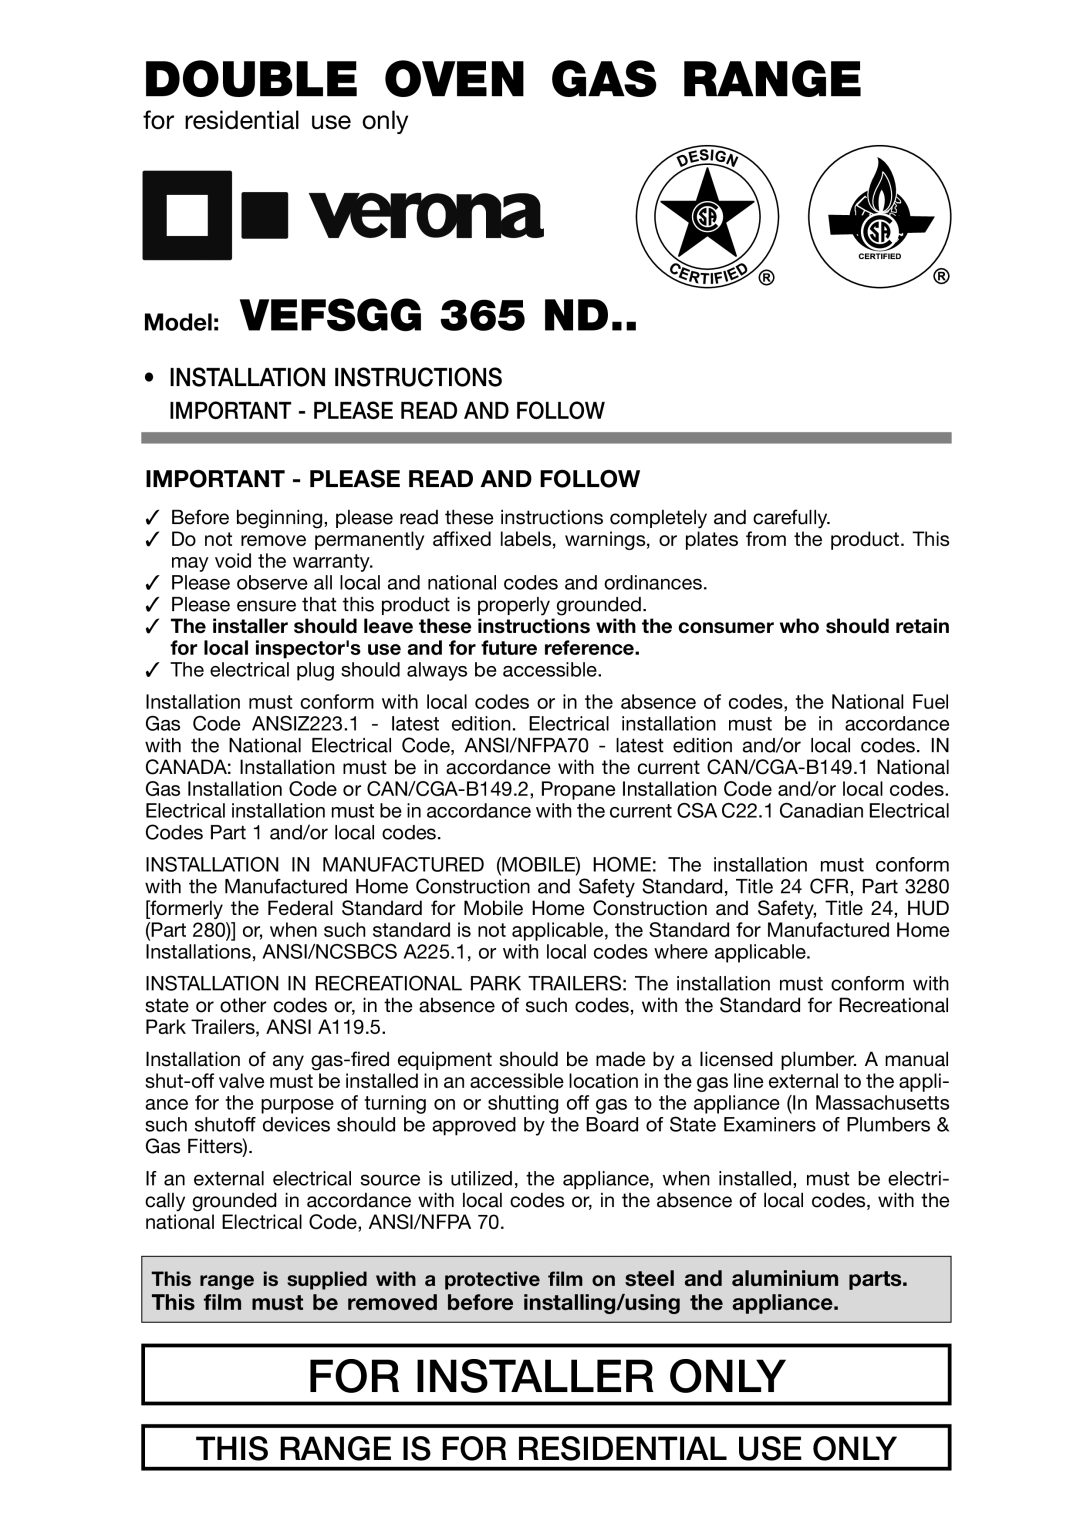 Verona VEFSGG 365 ND warranty for residential use only, Installation Instructions, Important - Please Read And Follow 